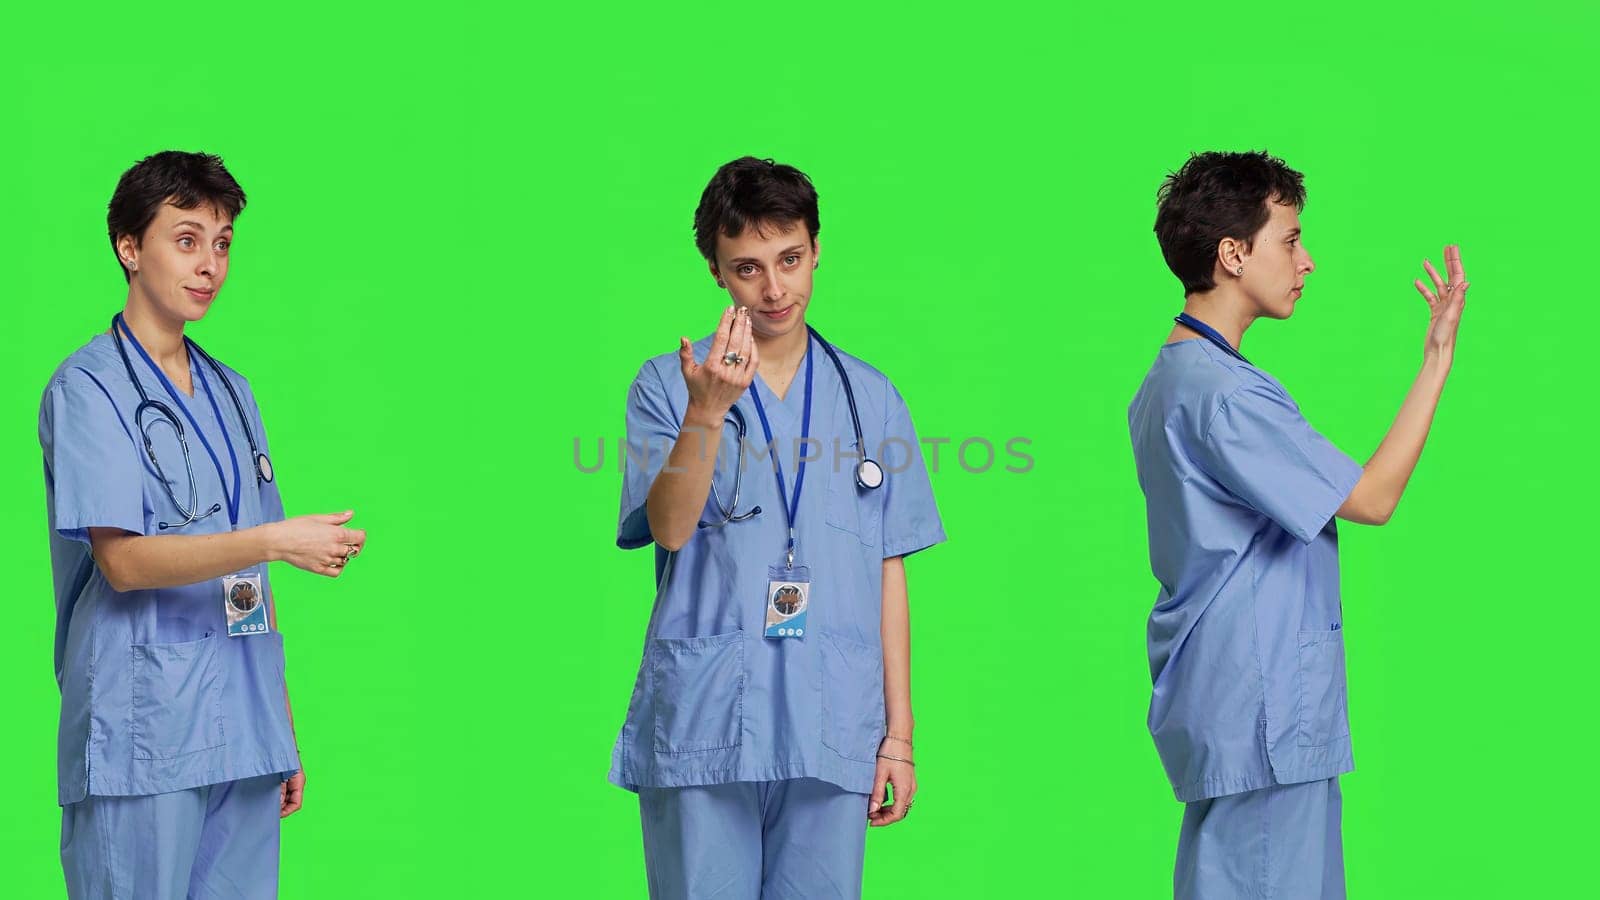 Medical assistant asking a person to come over closer against greenscreen backdrop, inviting patient to approach. Nurse in scrubs calling someone at checkup examination, young surgeon. Camera B.